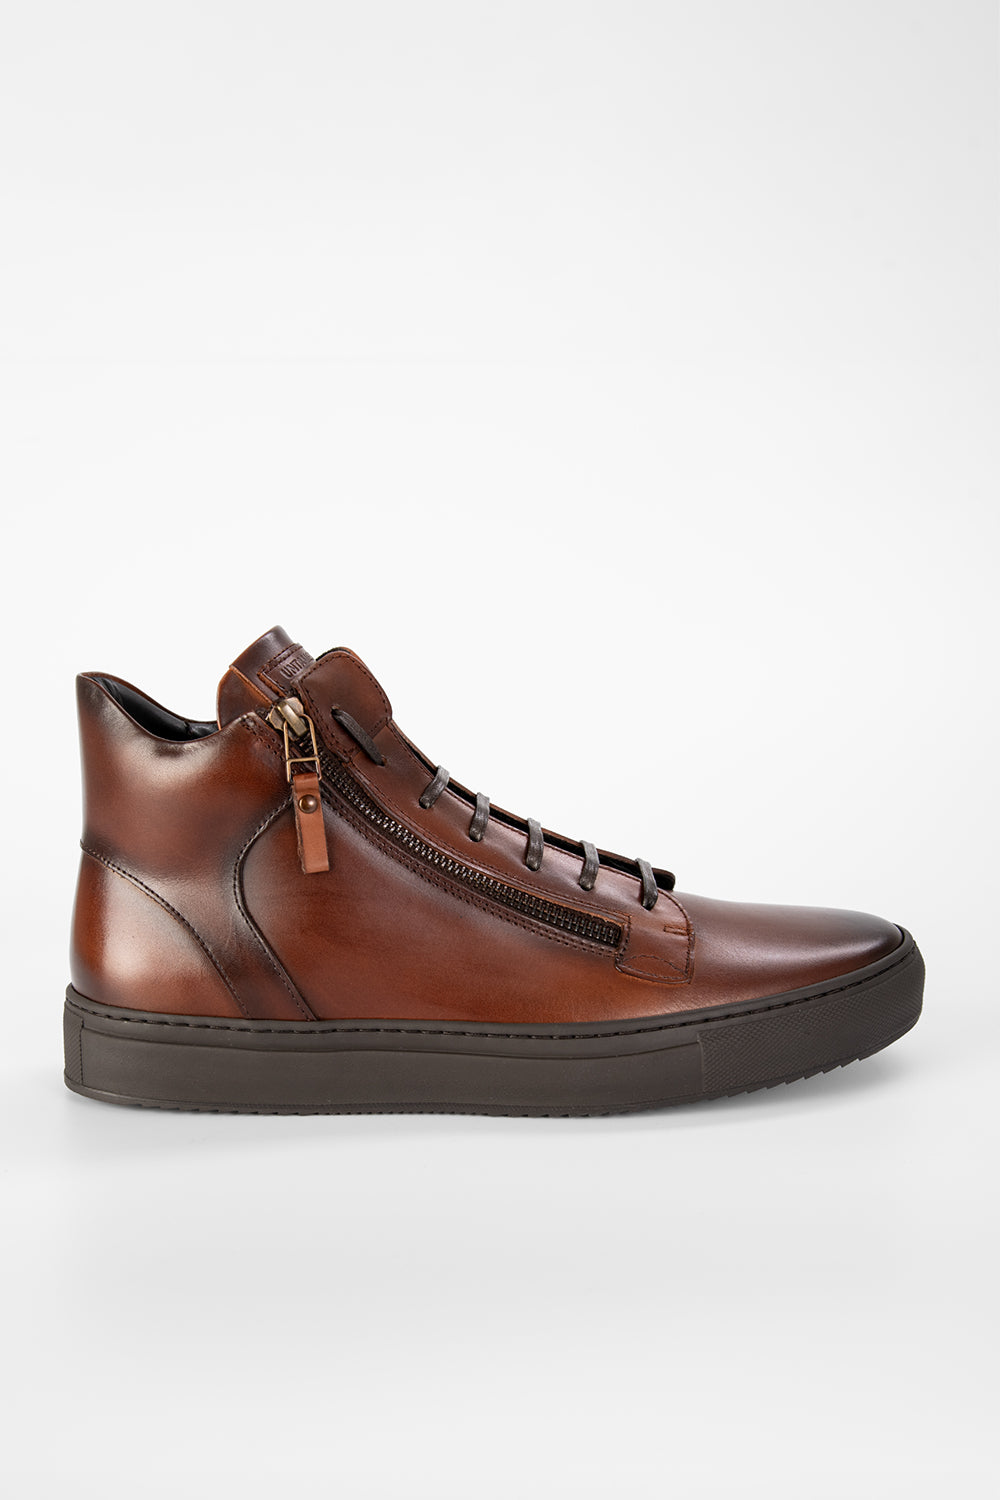 SOHO LOUNGE cocoa-brown patina high sneakers | untamed street | men ...